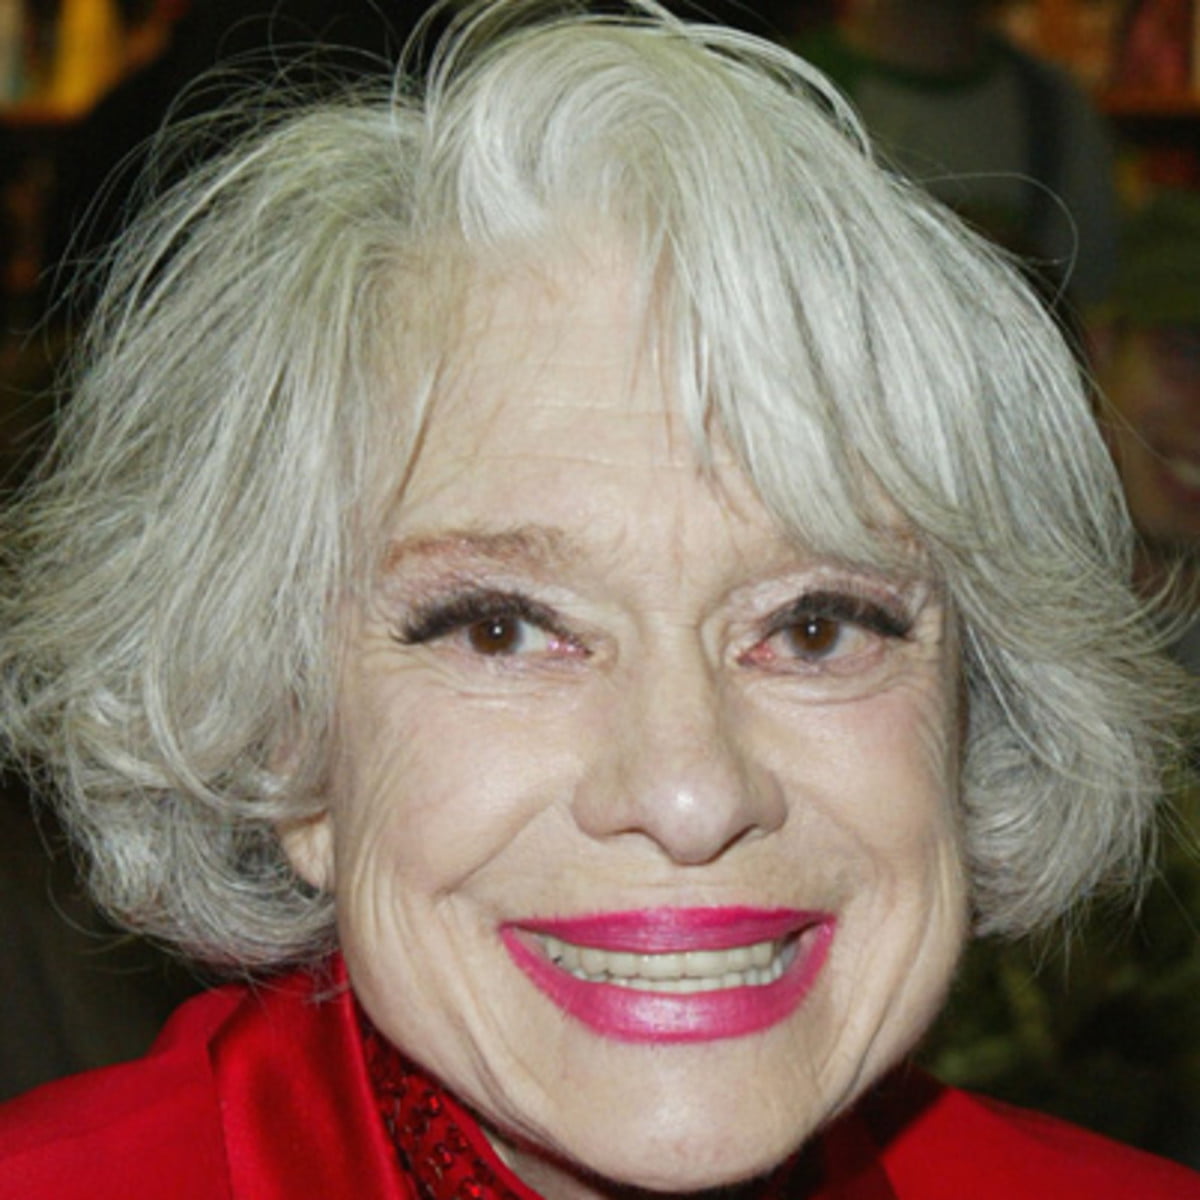 Who Are American Actress Carol Channing Parents? Father George Channing And Mother Adelaide Channing